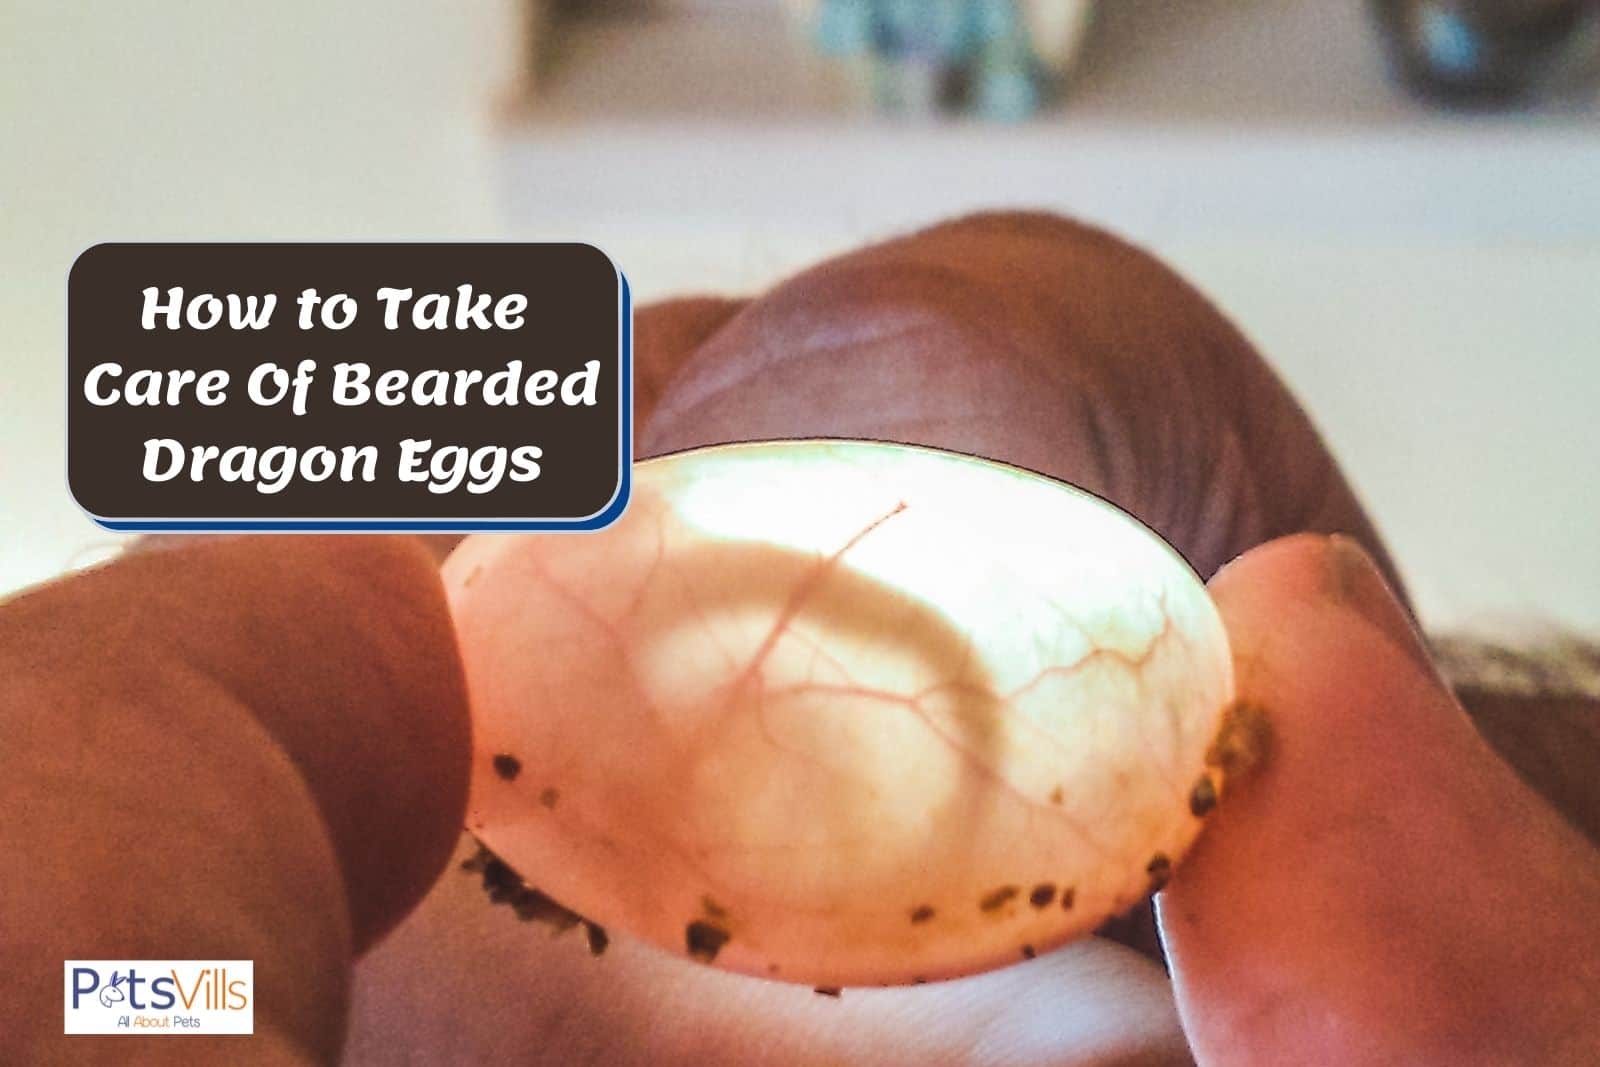 man showing how to take care of bearded dragon eggs